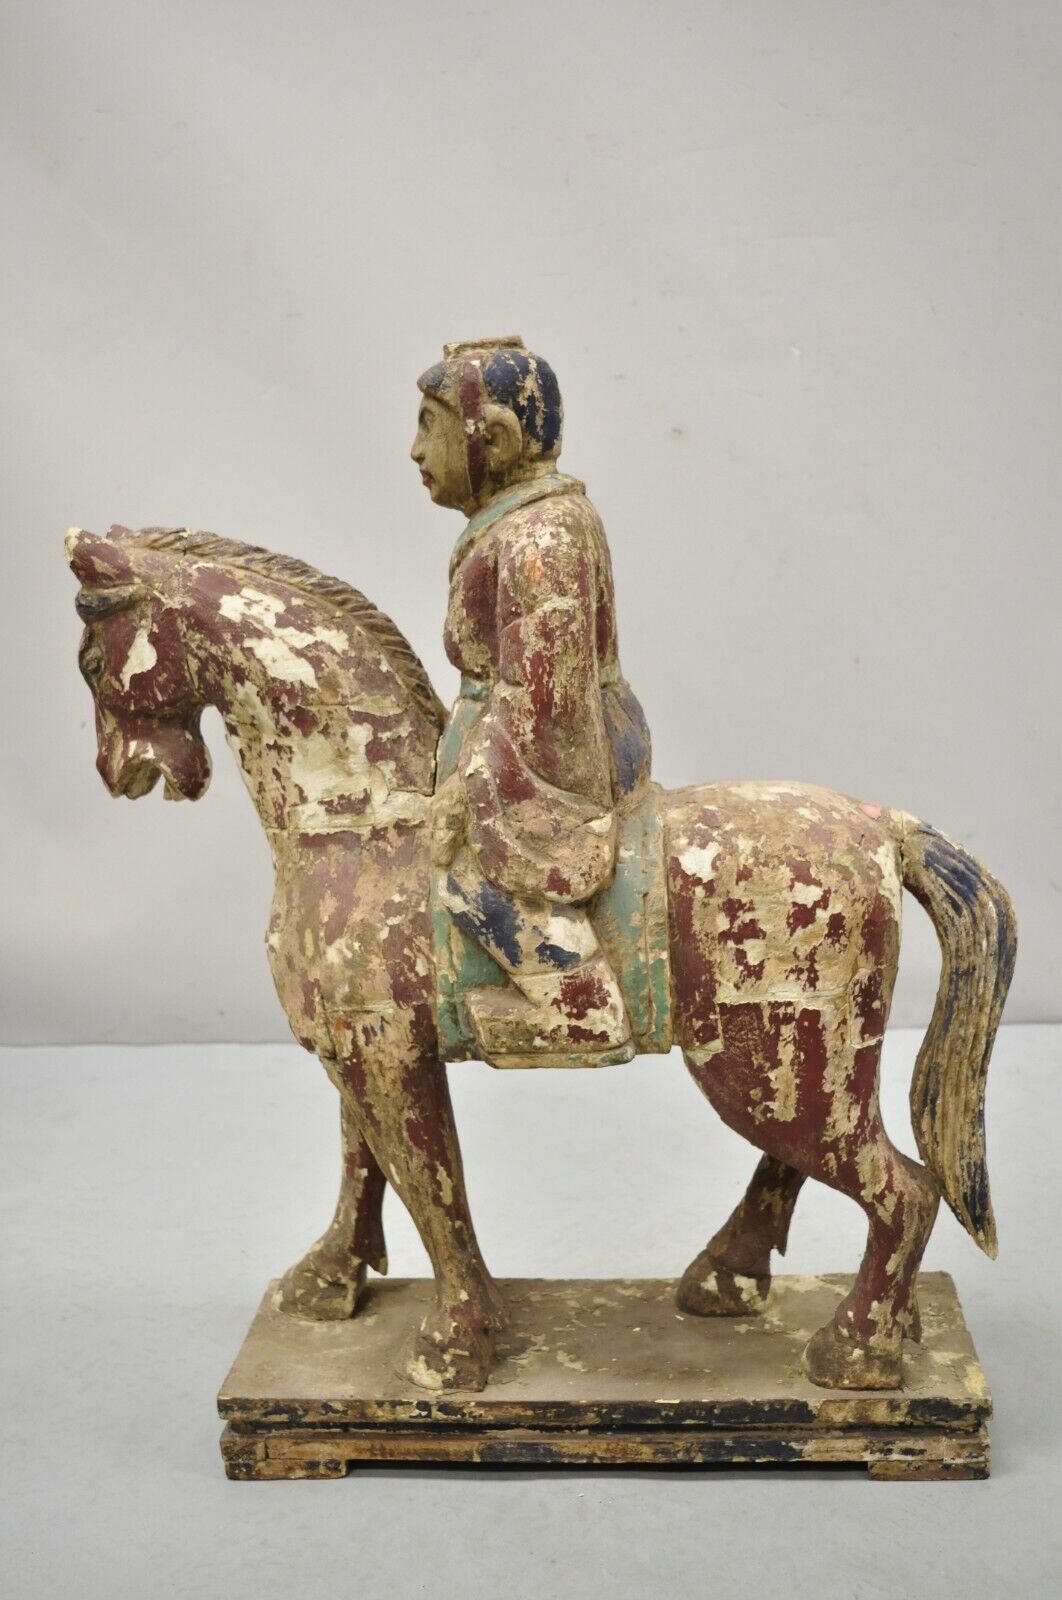 Chinese Polychrome Carved Wood Tang Horse and Rider Statue Sculpture